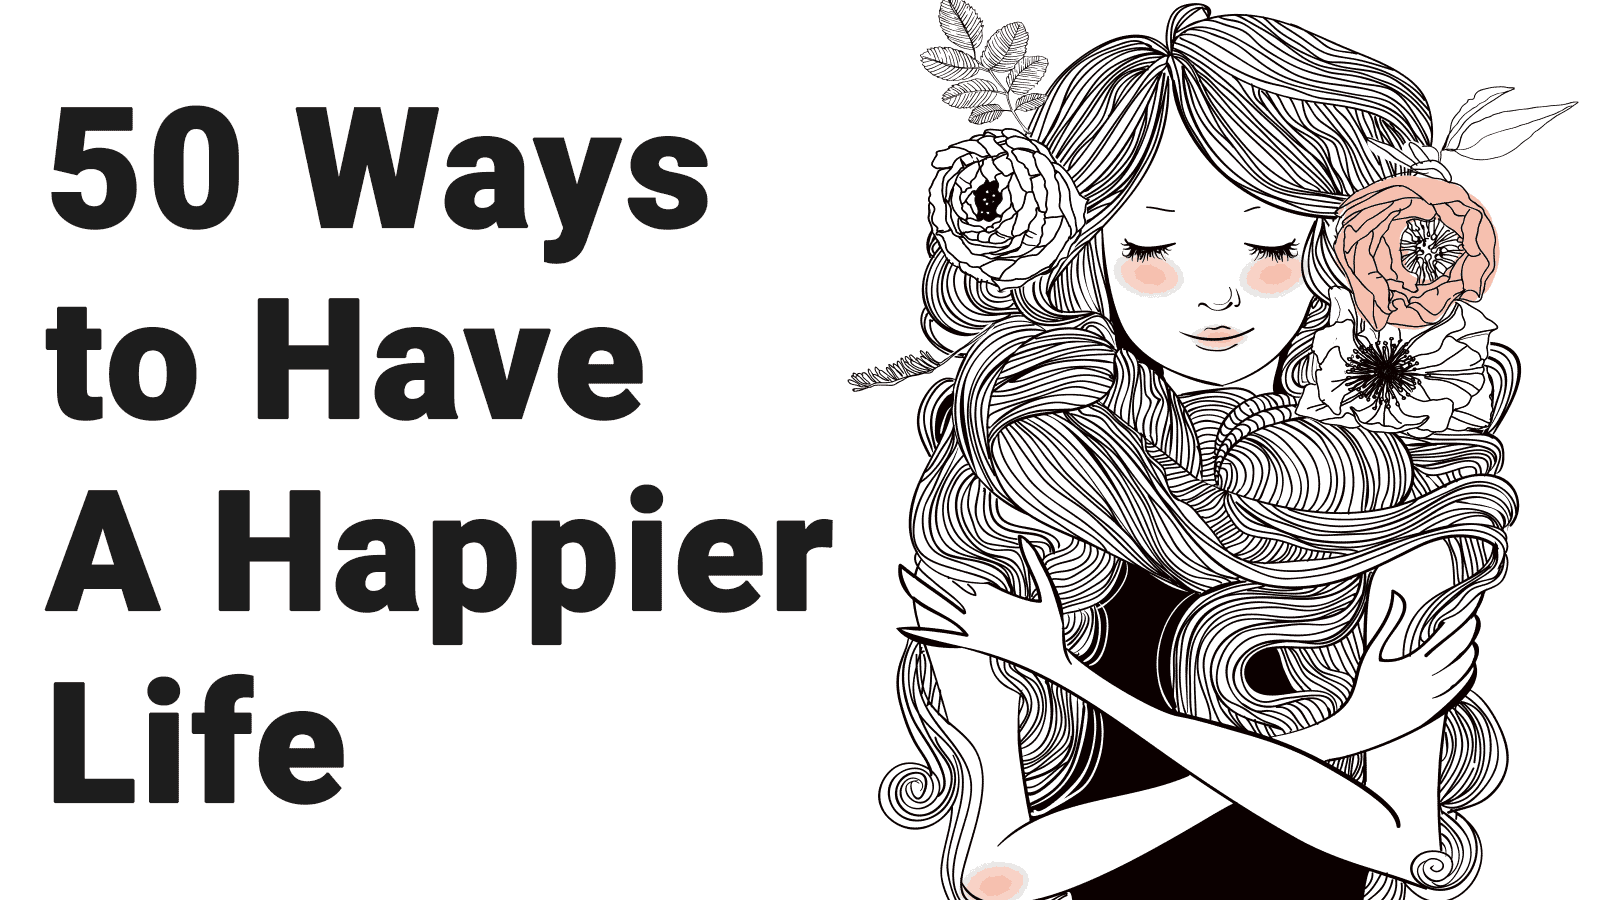 50 Ways to Have A Happier Life